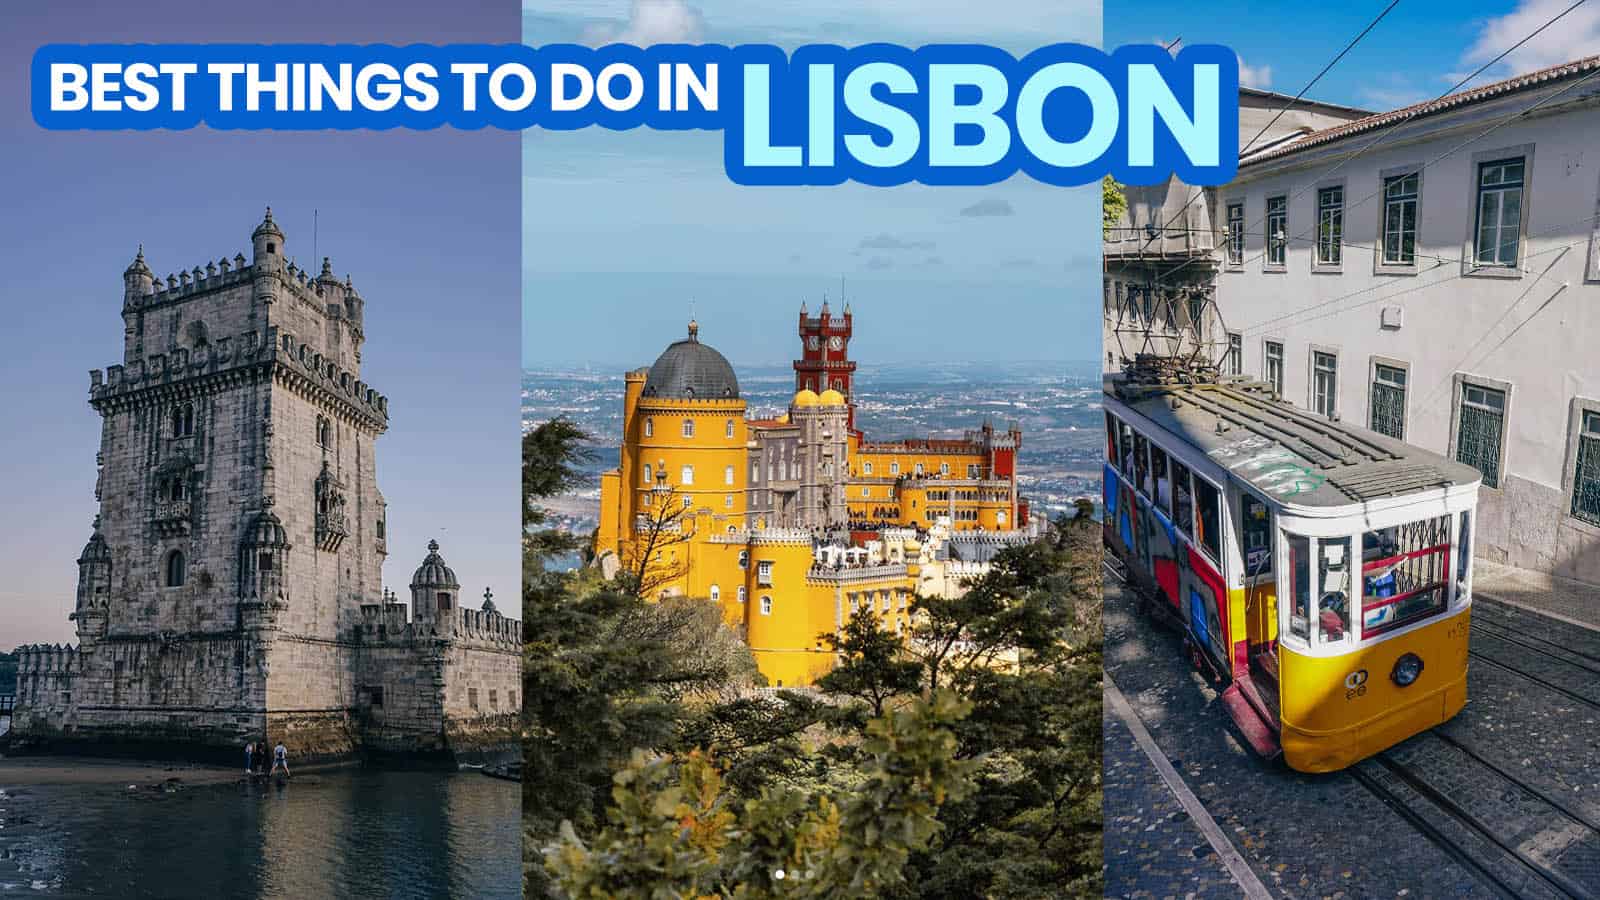 30 BEST THINGS TO DO IN LISBON, PORTUGAL (City Tours & Tourist Spots)